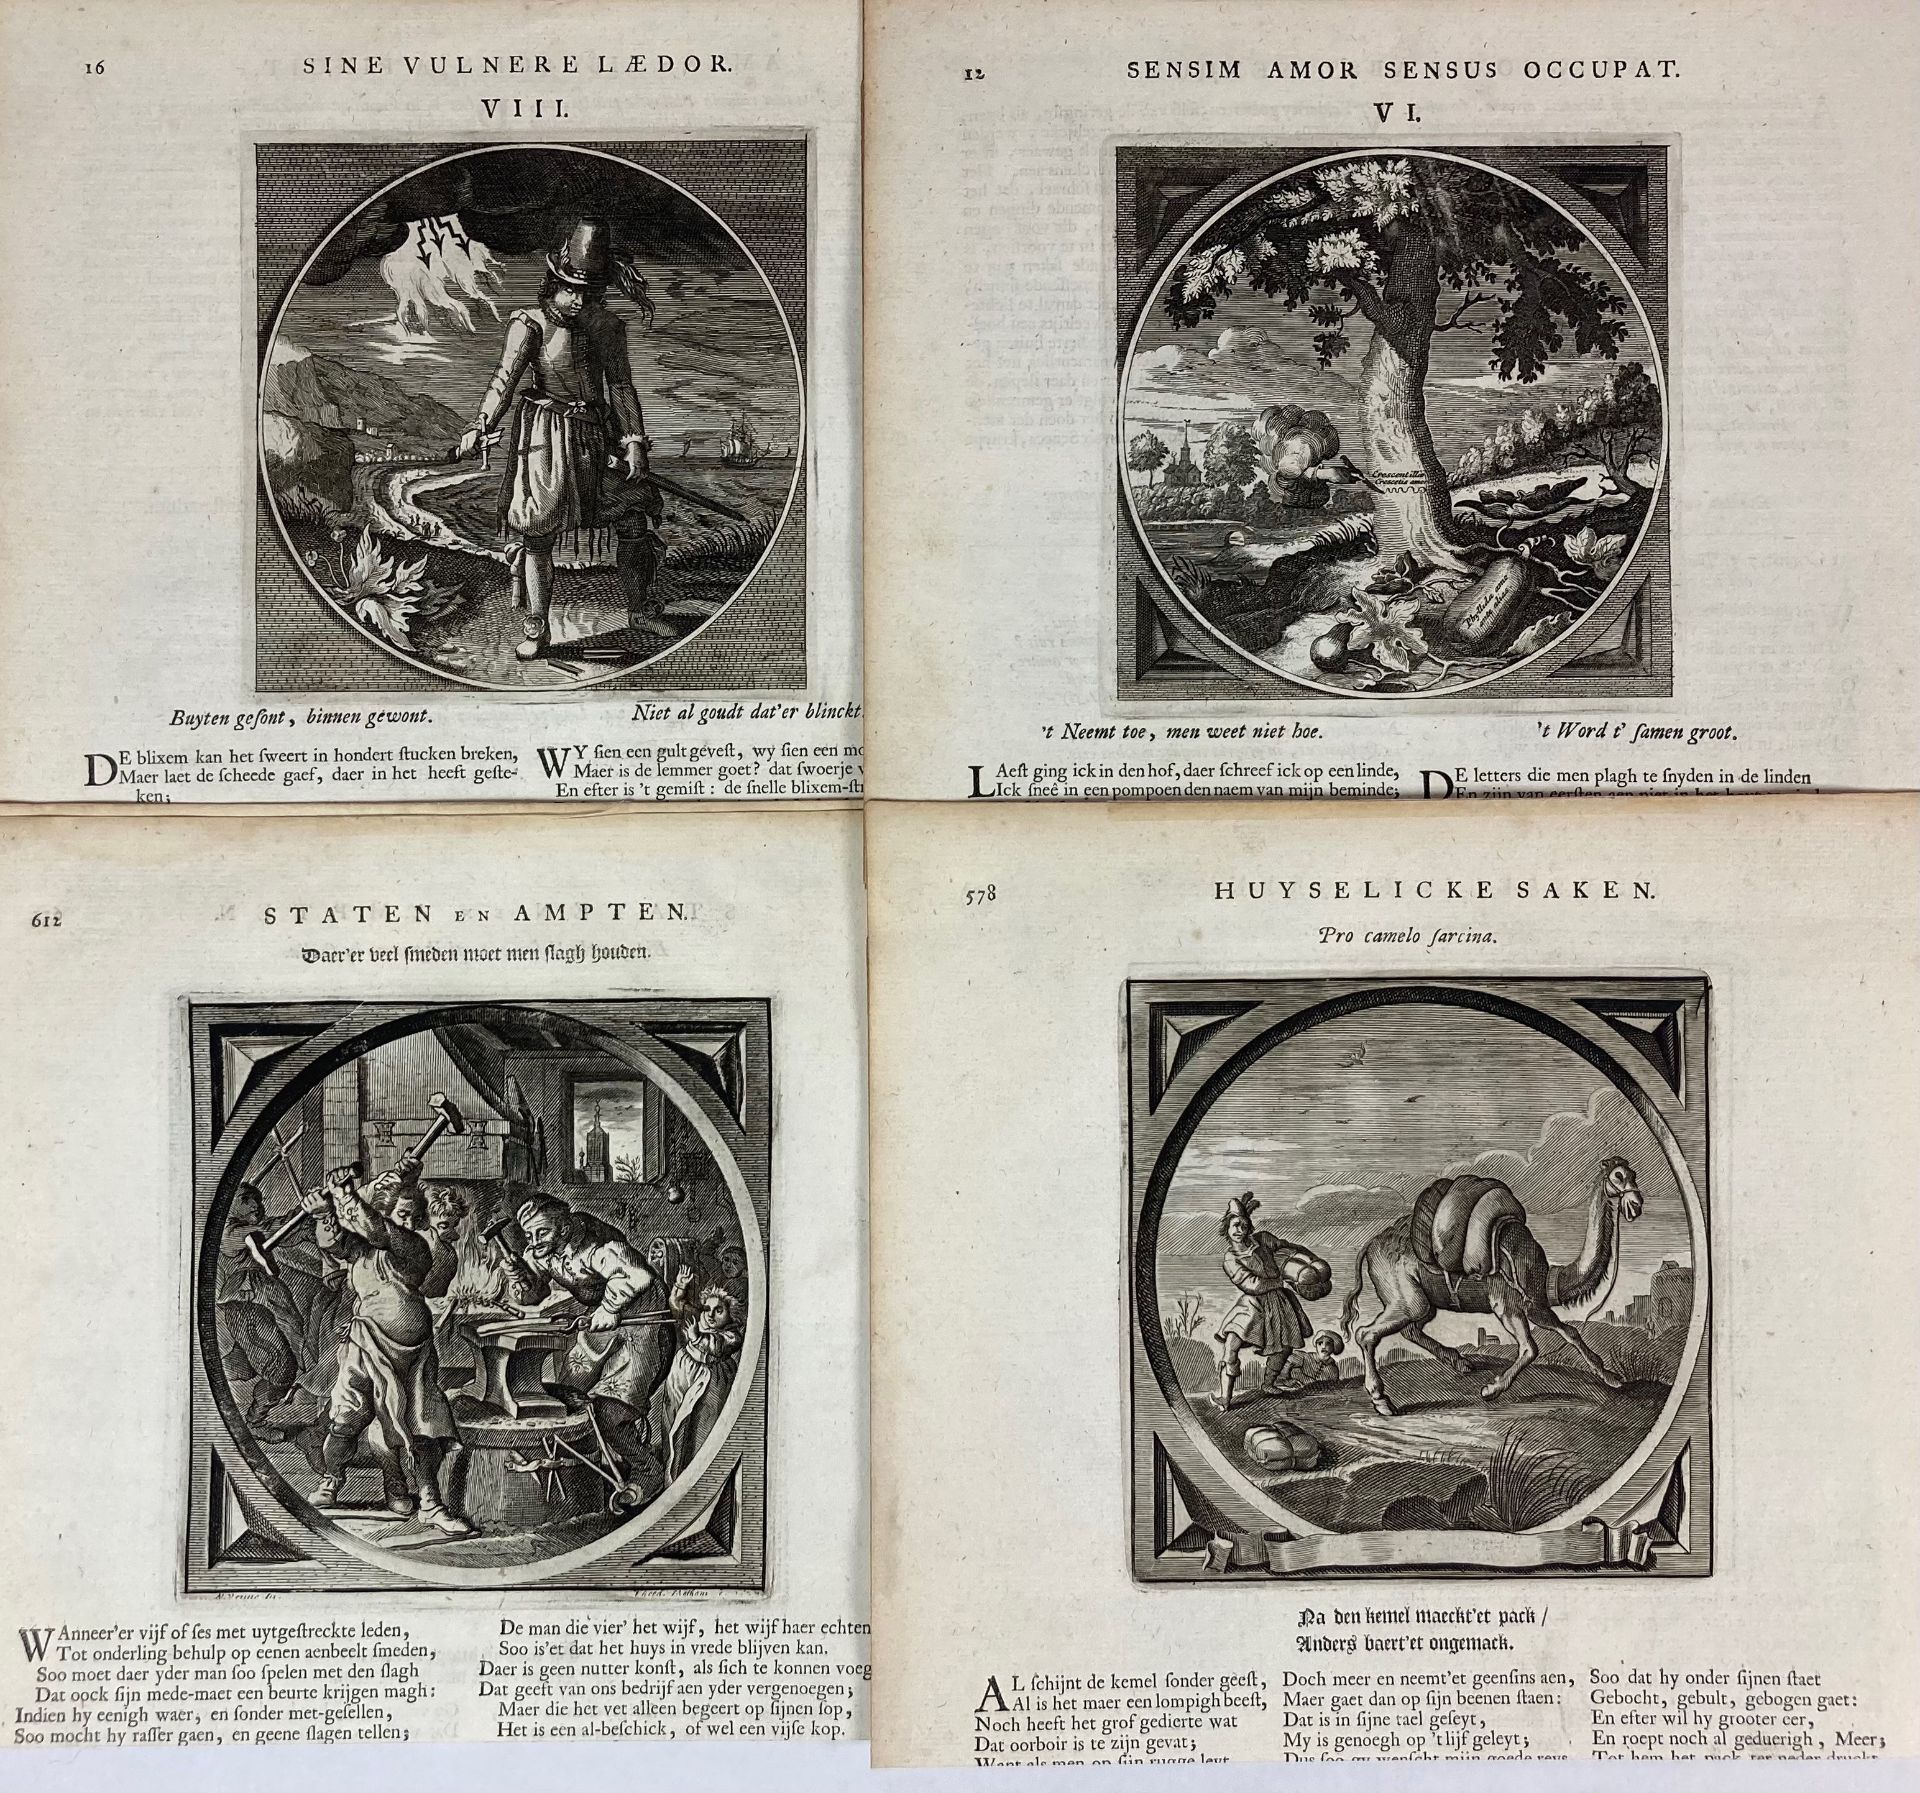 EMBLEMS -- COLLECTION of c. 200 - for the greater part emblematical - engravings taken